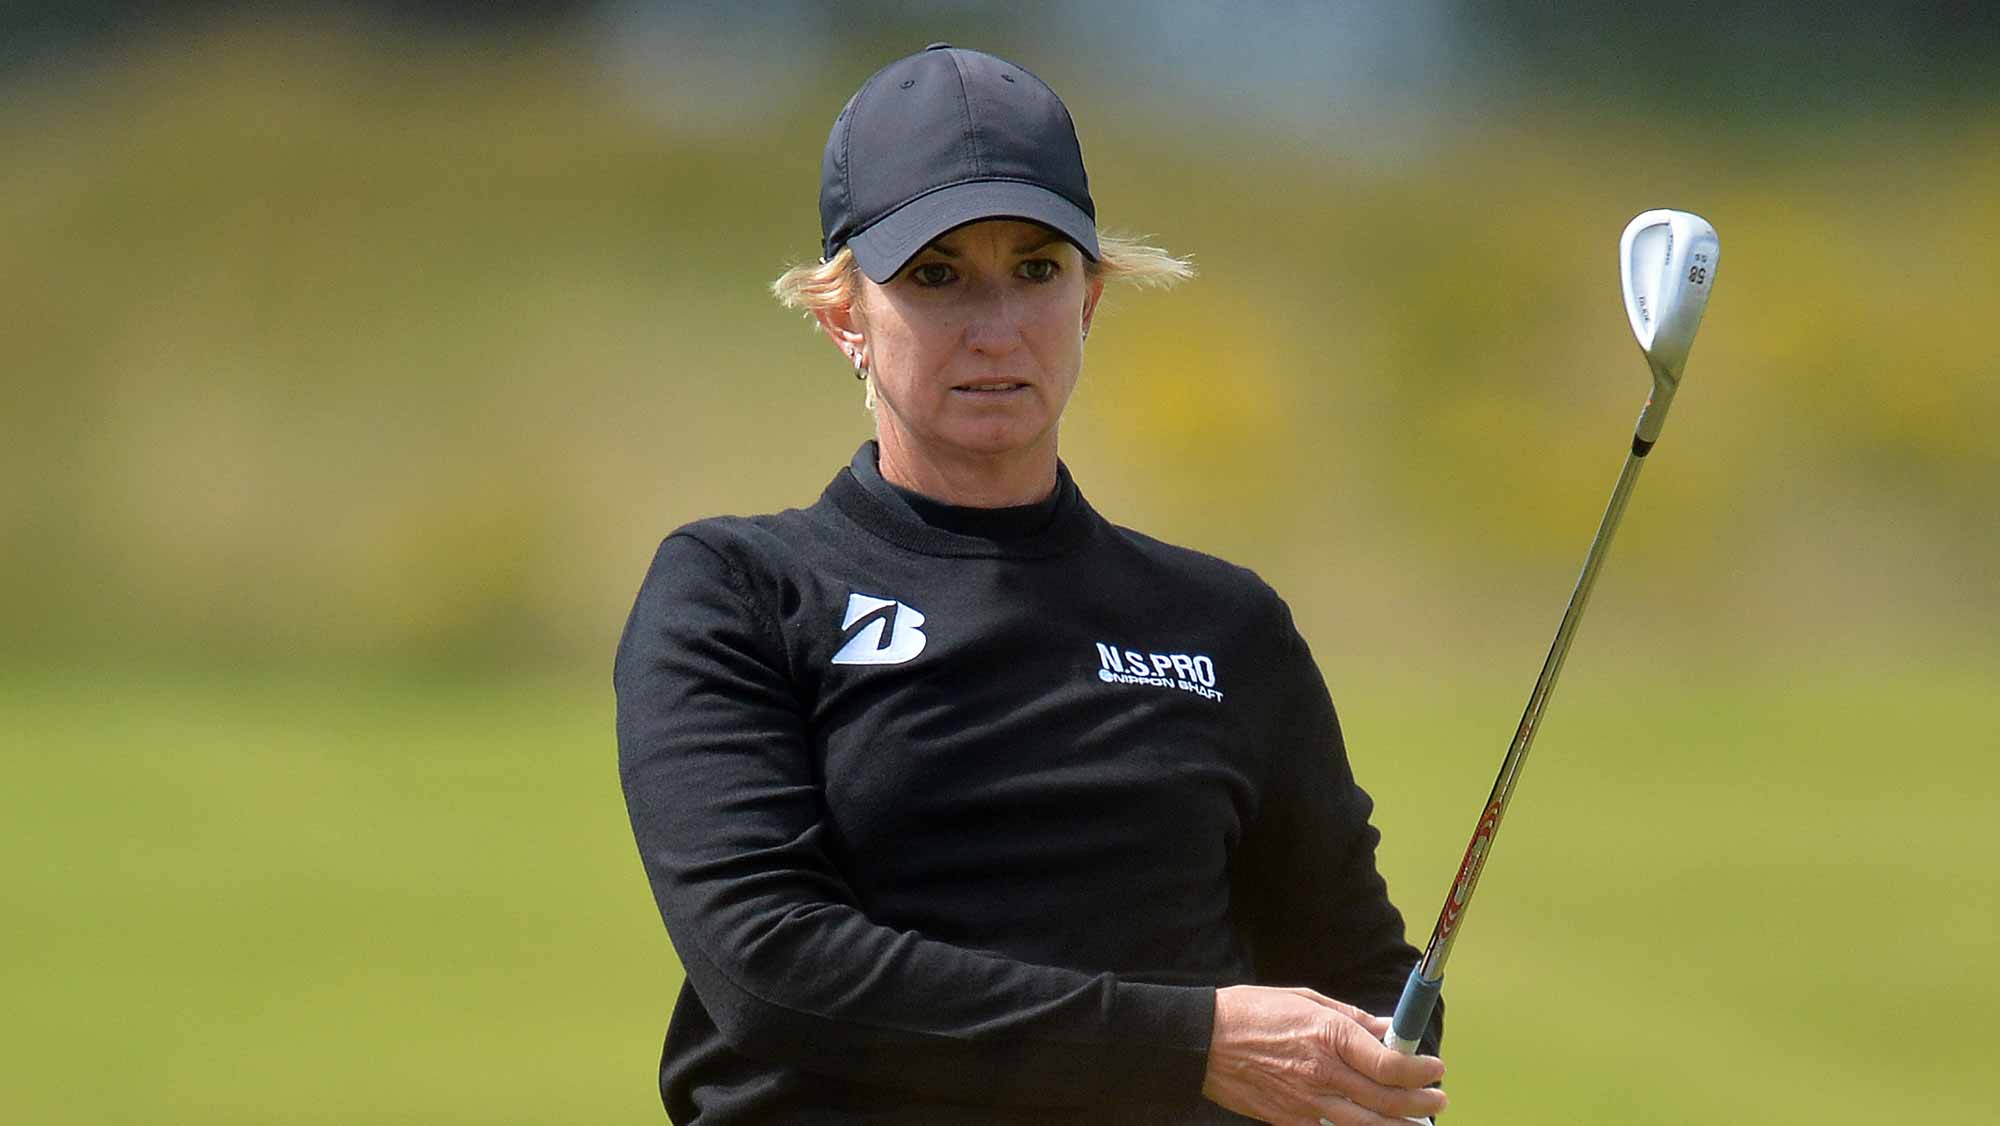 Karrie Webb of Australia plays her second shot at the 18th hole during the second day of the Aberdeen Asset Management Ladies Scottish Open at Dundonald Links Golf Course